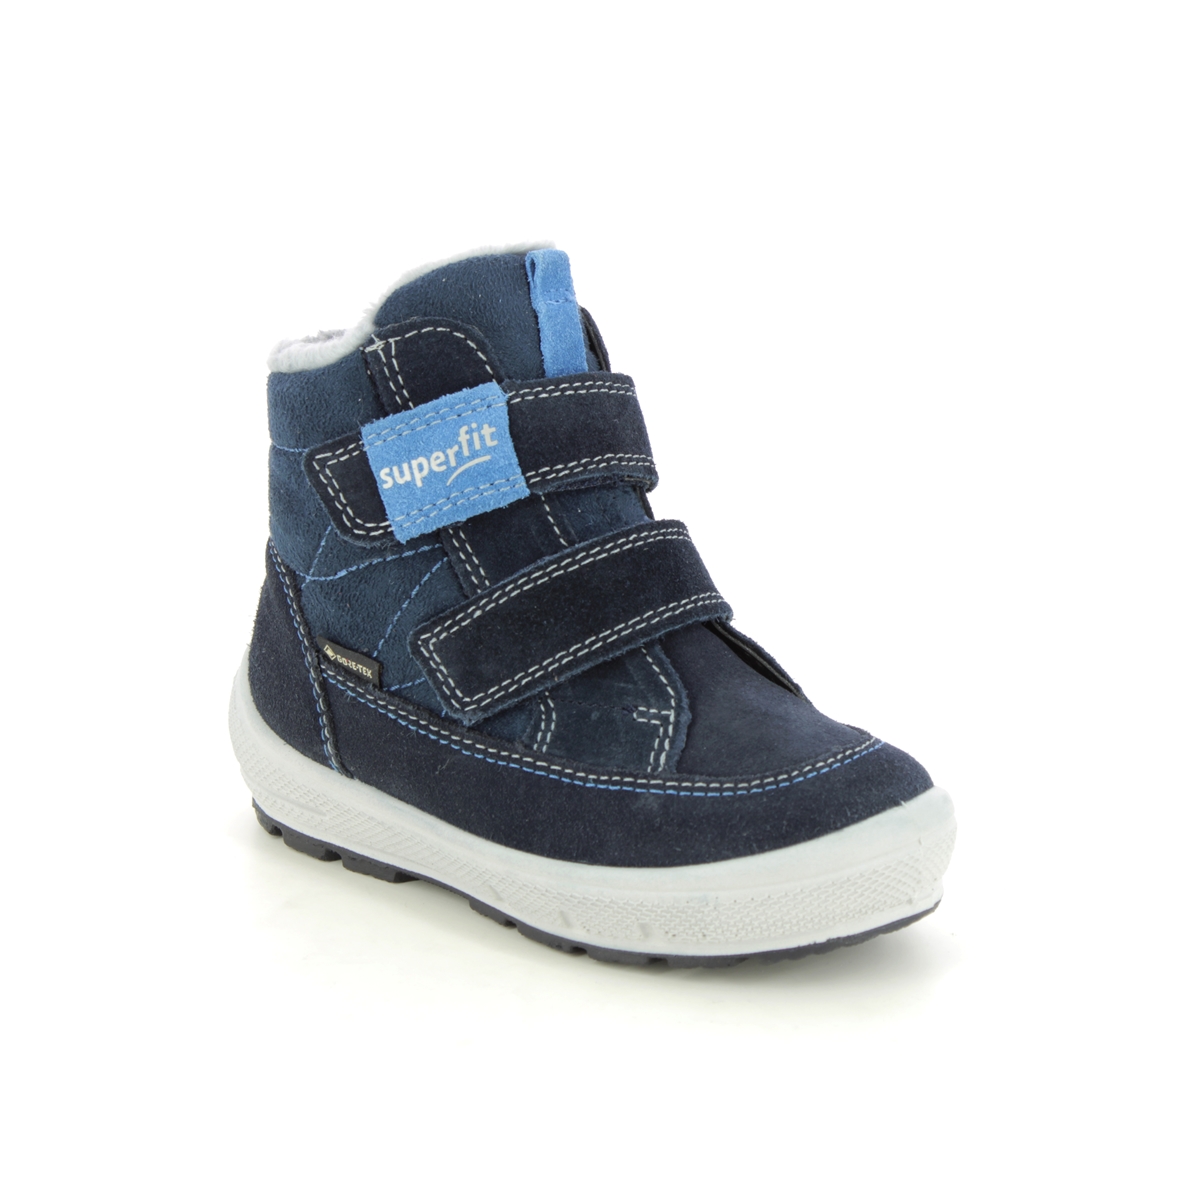 Superfit Groovy Gtx Navy Kids Toddler Boys Boots 1009314-8000 in a Plain Leather in Size 23